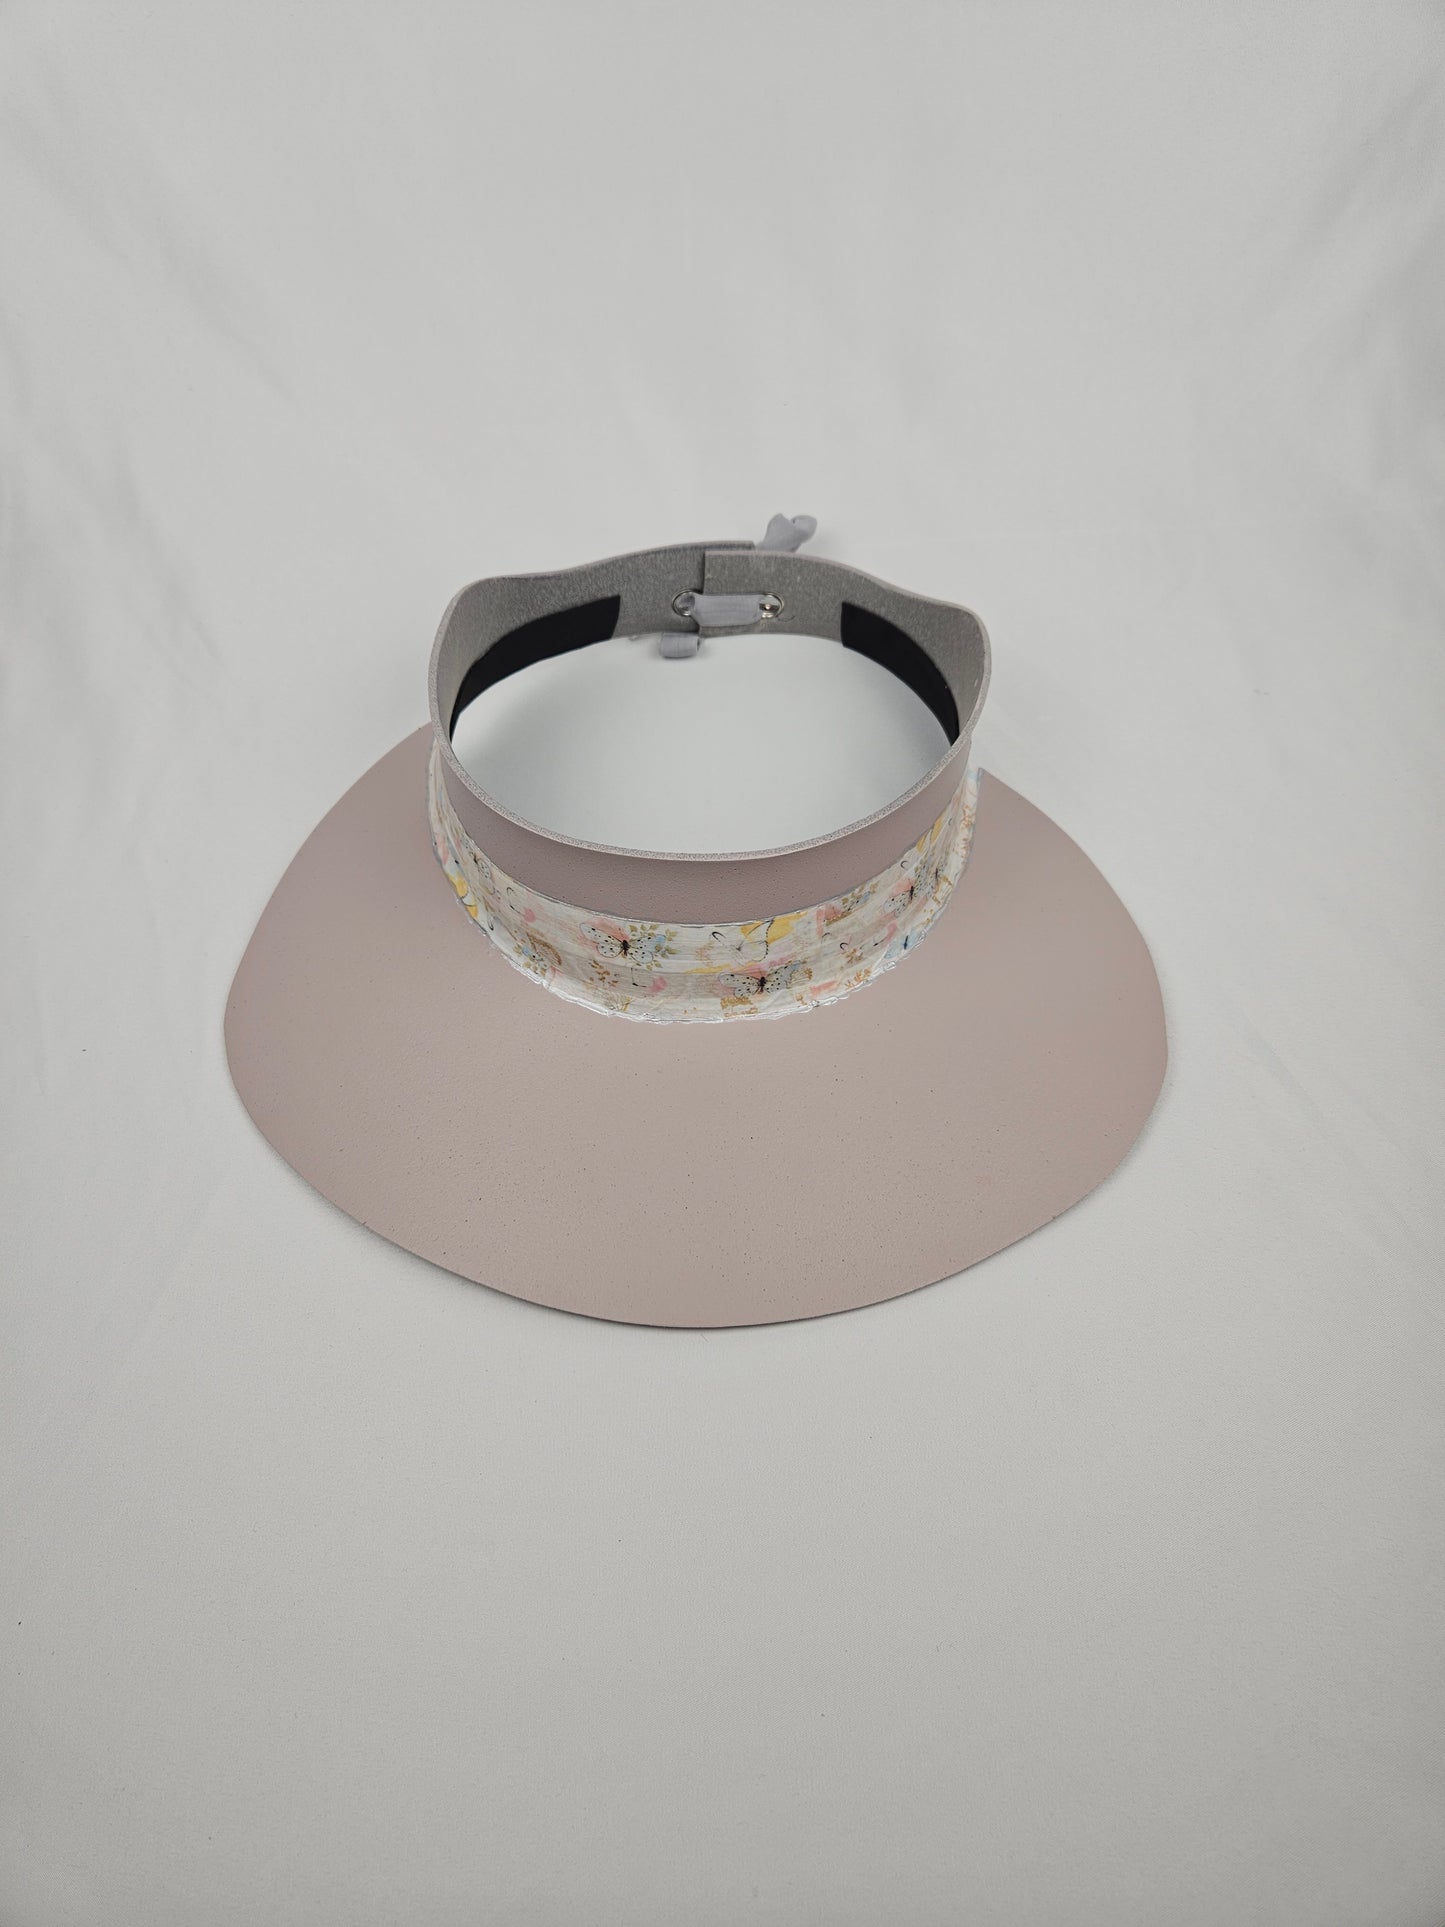 Soft Pink Audrey Foam Sun Visor Hat with Pastel Floral and Butterfly Band: 1950s, Walks, Brunch, Asian, Golf, Easter, Church, No Headache, Derby